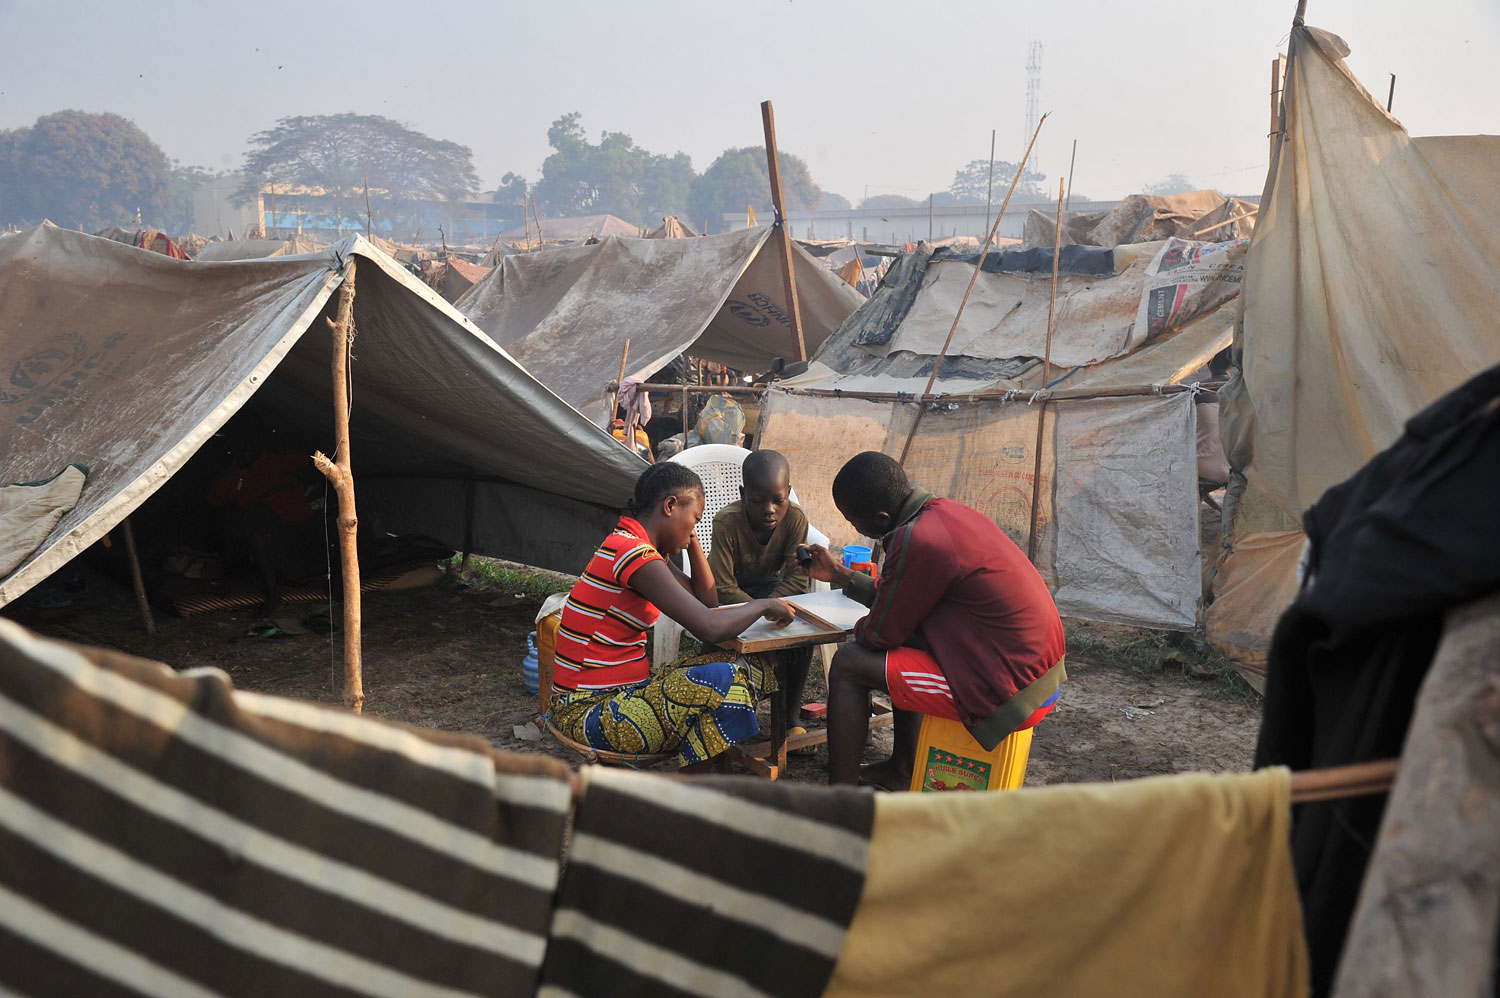 Children play next to makeshift shelters in the camp for displaced persons near the Mpoko airport in Bangui, on Jan. 21, 2014, a day after the election of Catherine Samba-Panza as the new President of the Central African Republic.